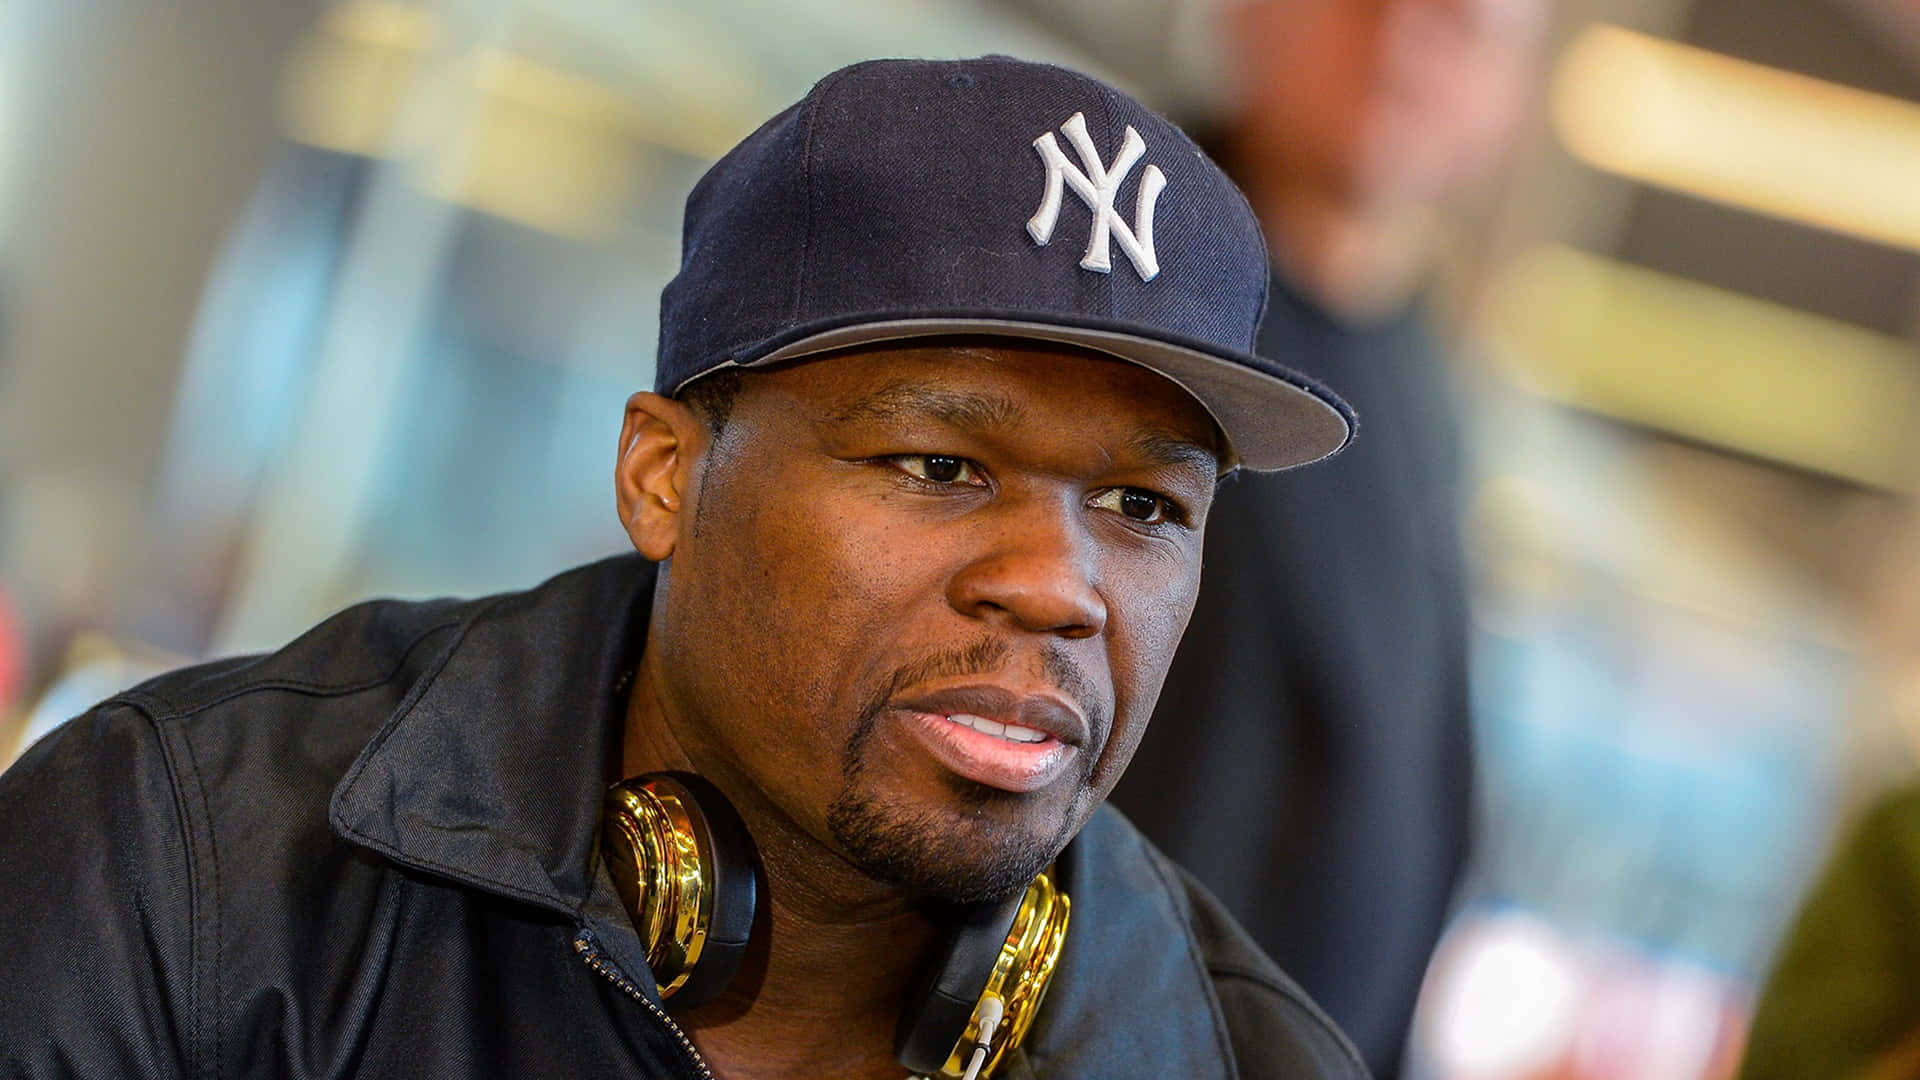 50 Cent Raps To The Crowd At A Music Festival